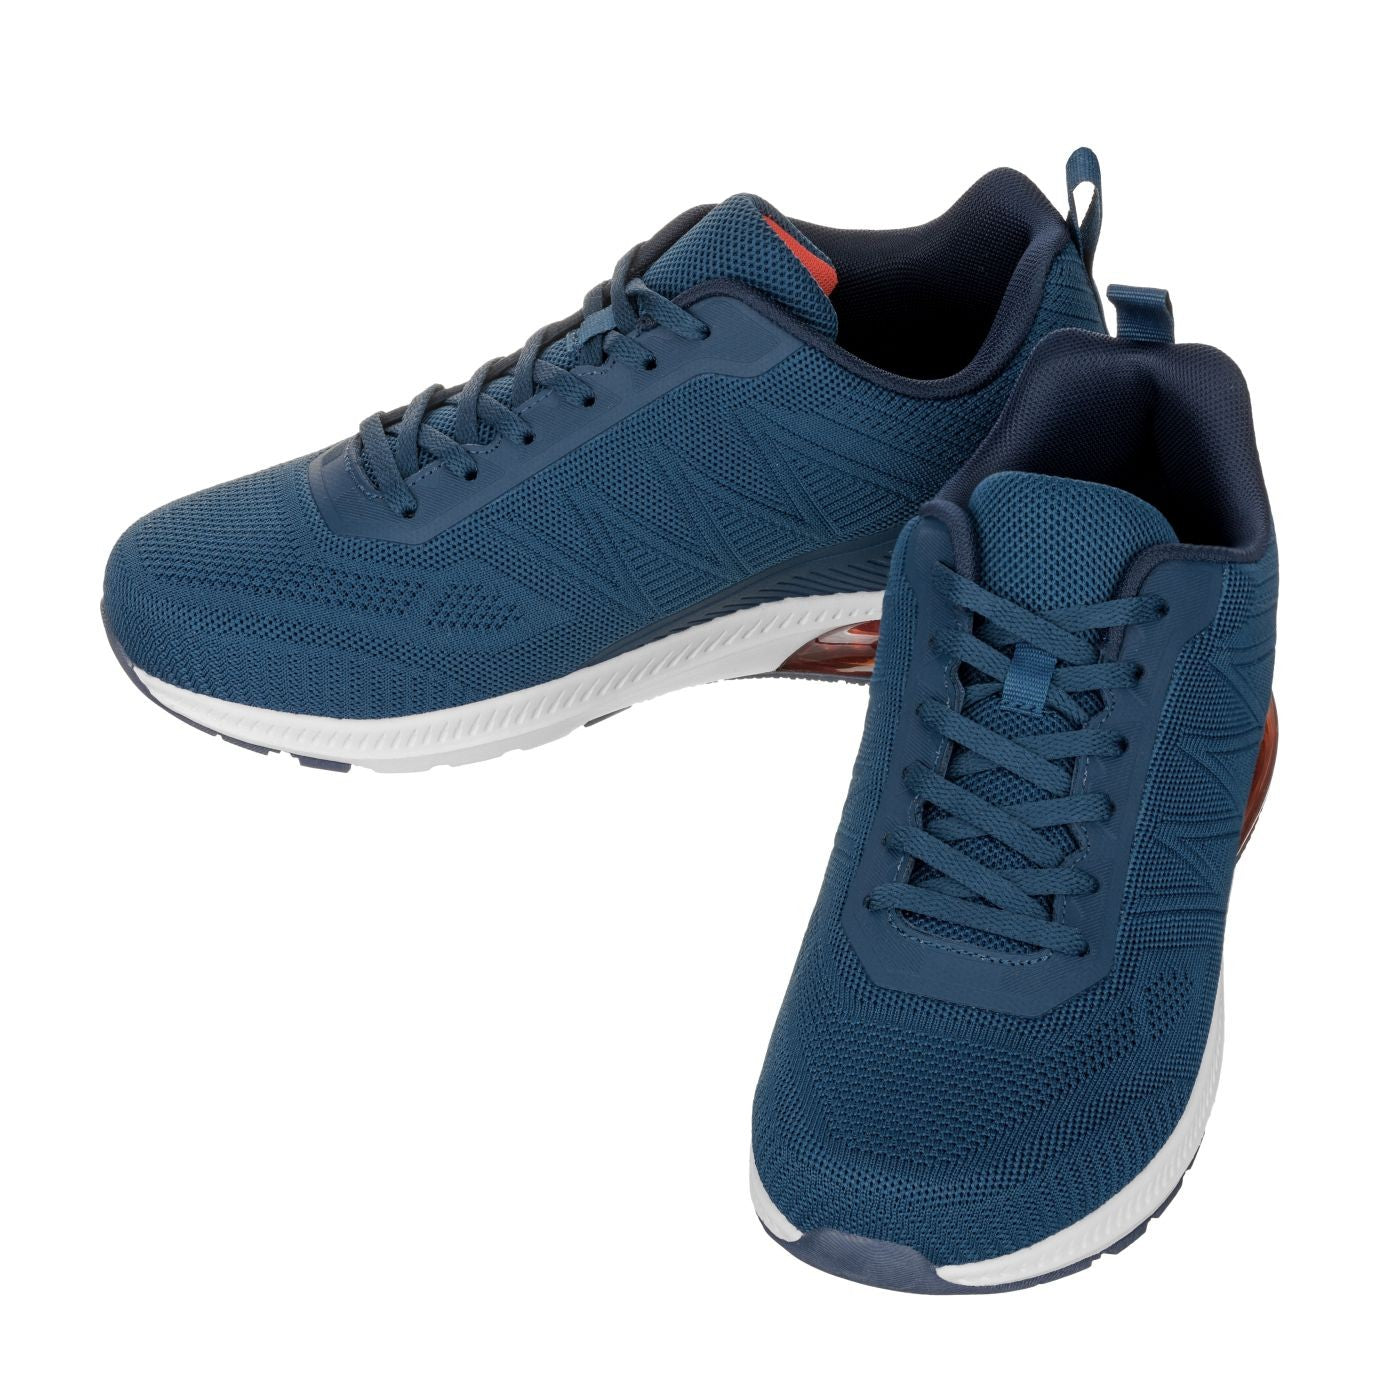 Elevator shoes height increase CALTO - Q230 - 2.4 Inches Taller (Navy/Red) - Super Lightweight